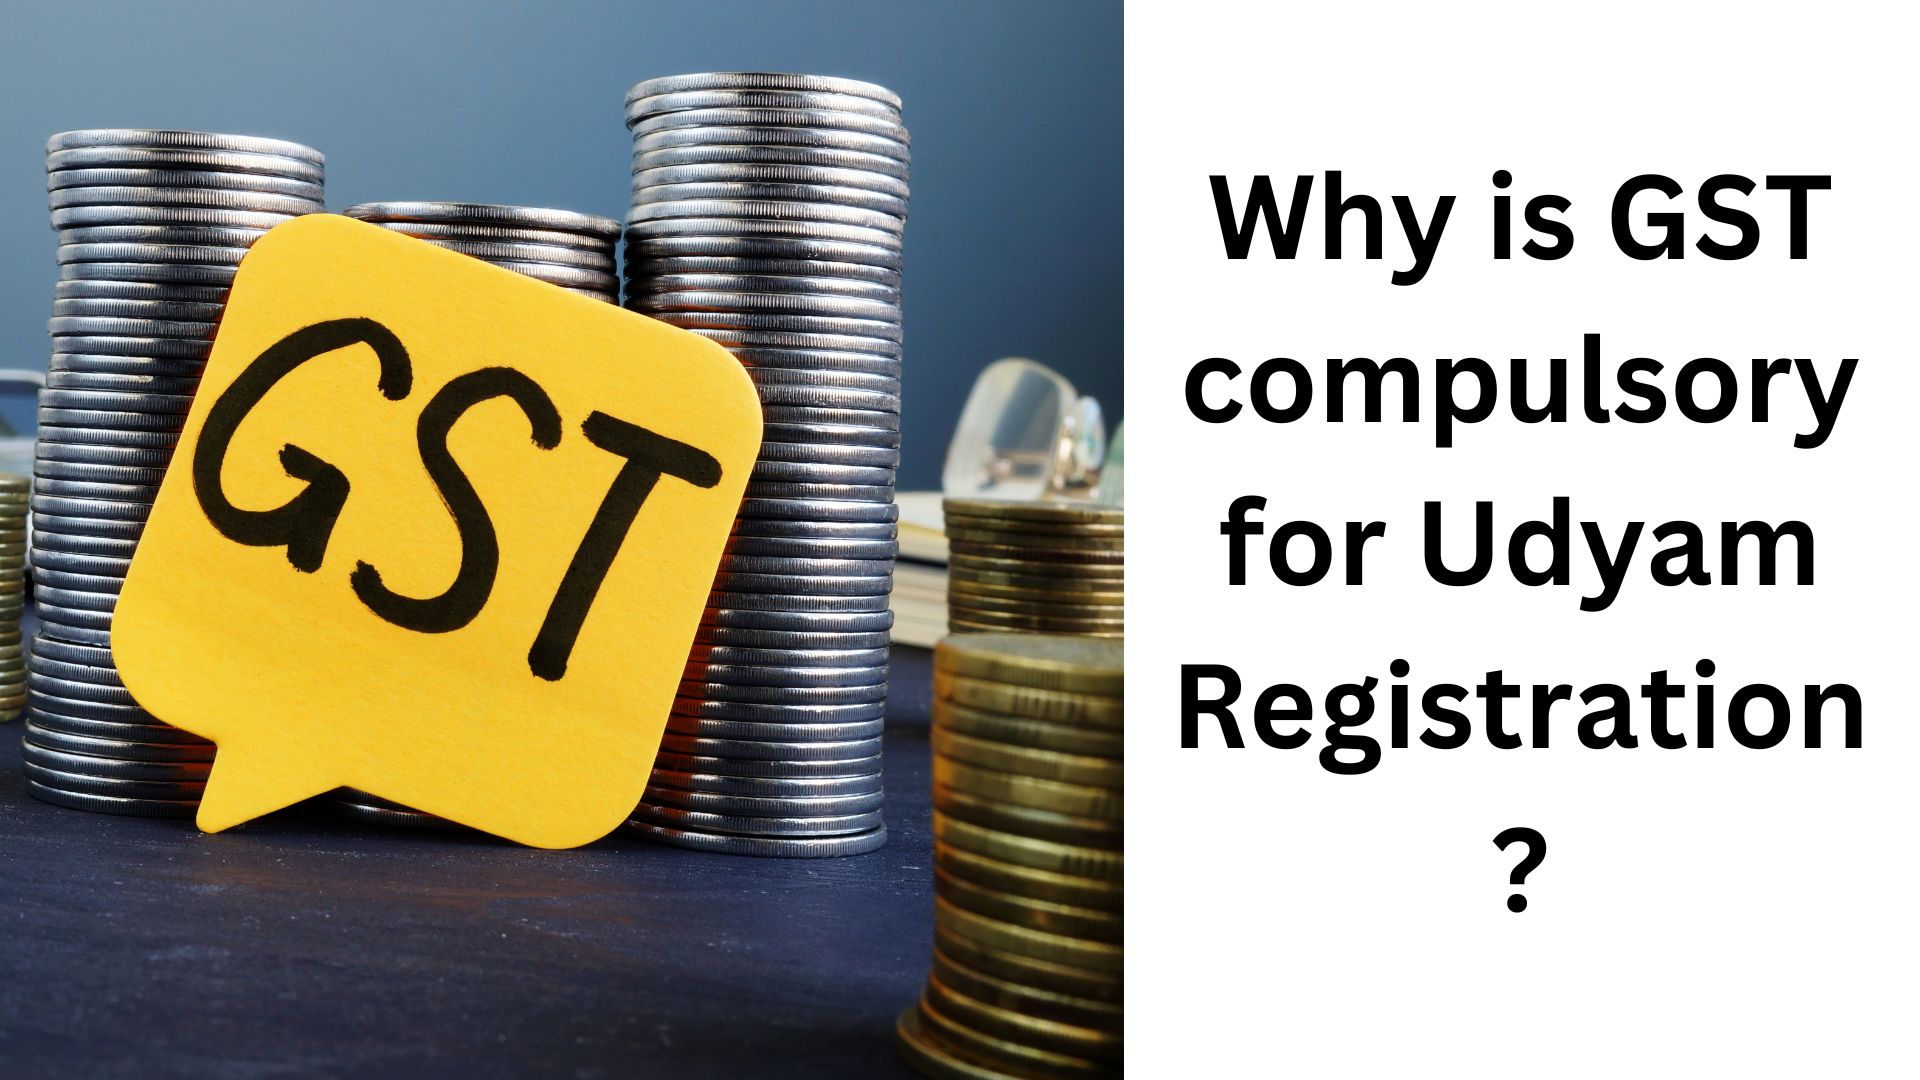 Why is GST compulsory for Udyam Registration